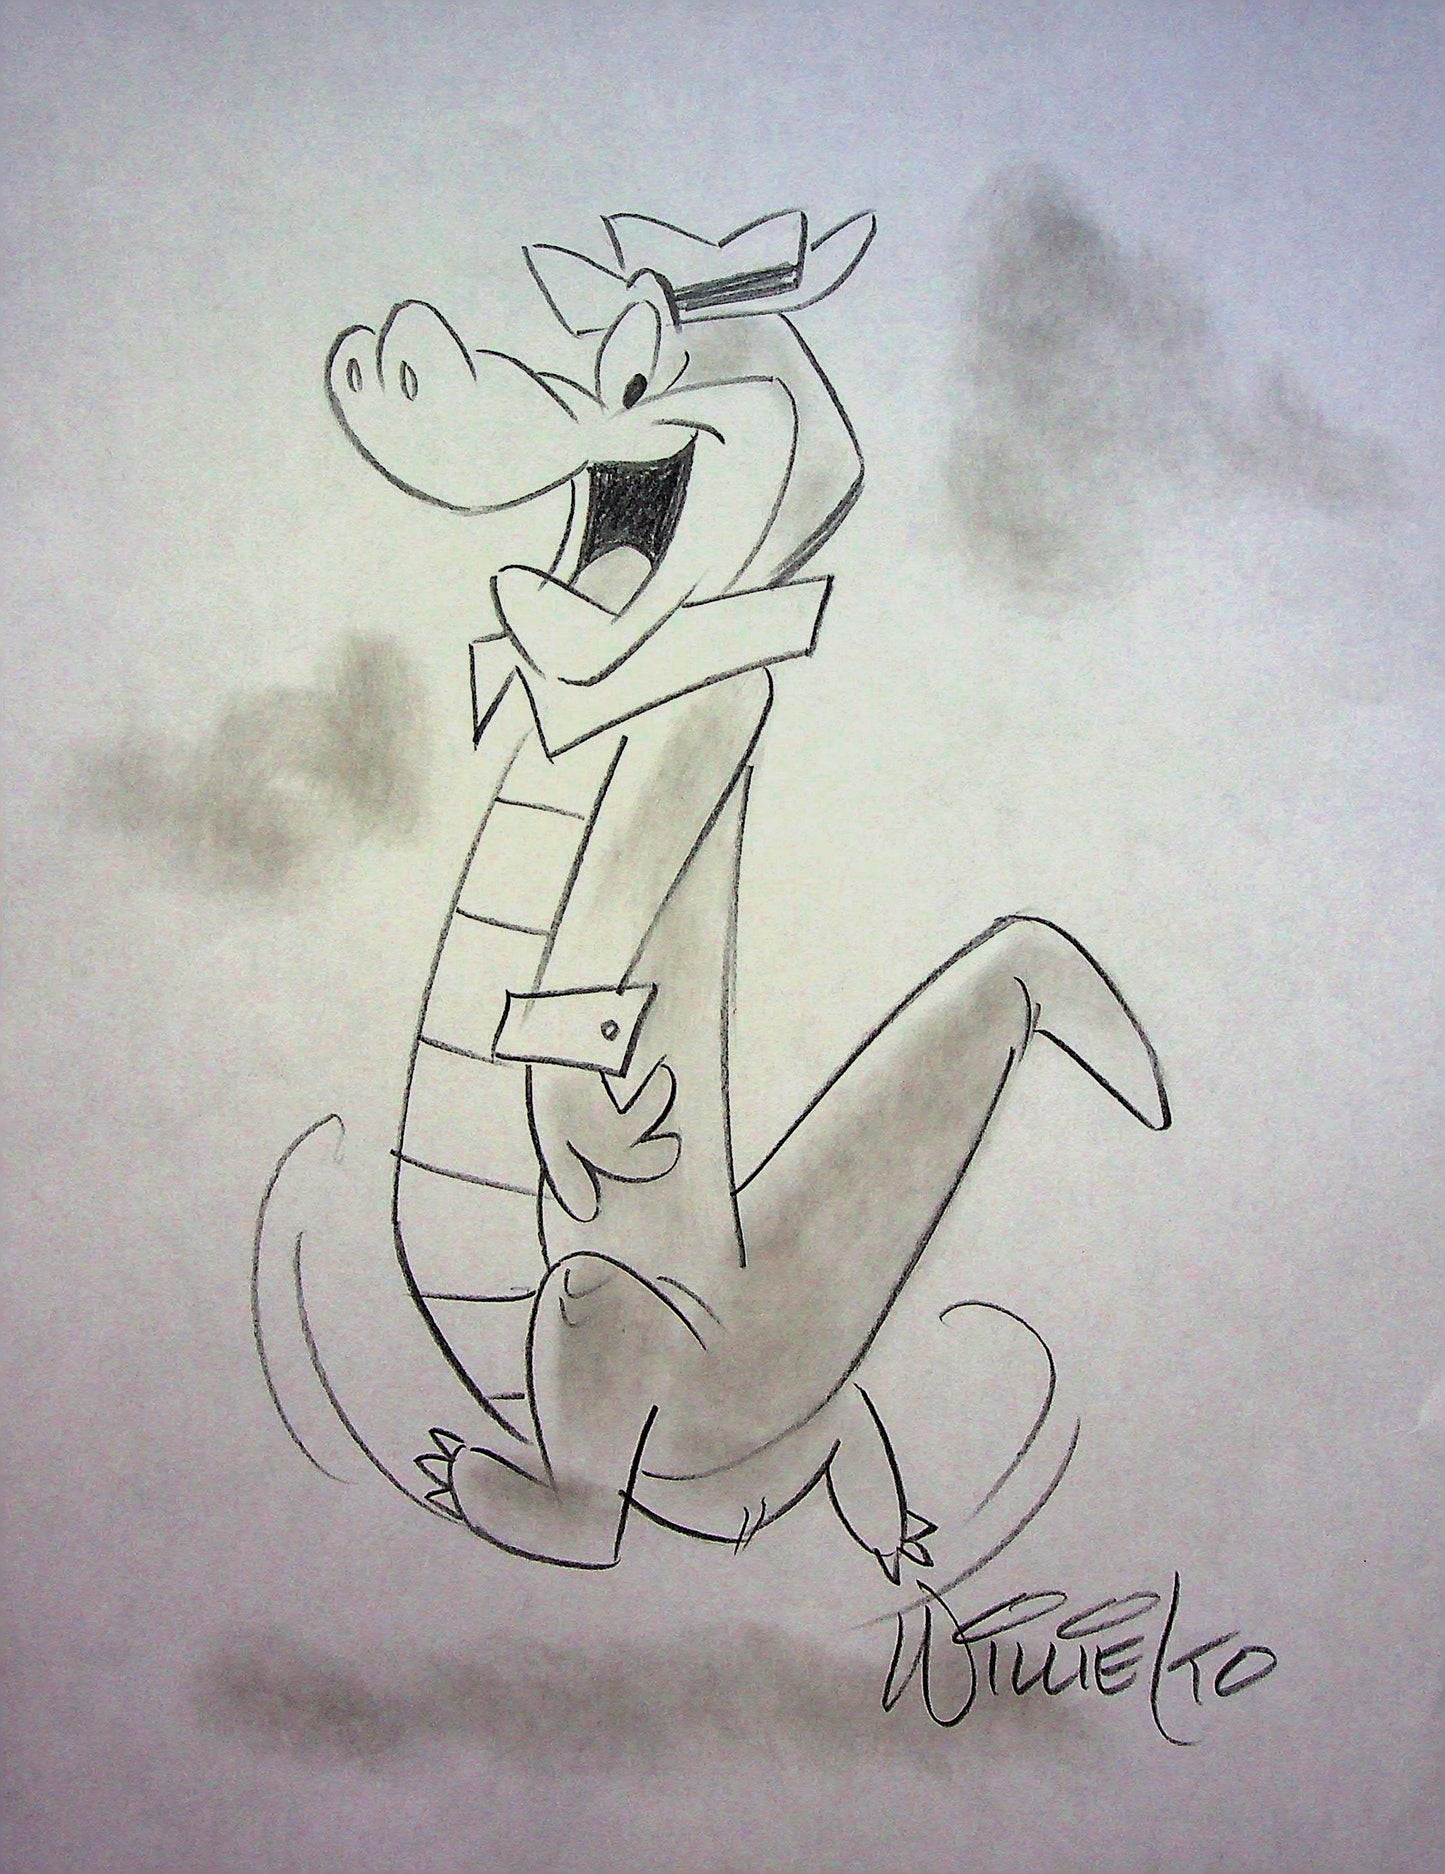 WALLY GATOR Willie Ito Signed Hand Drawn Pencil Animation Art 8"x11"